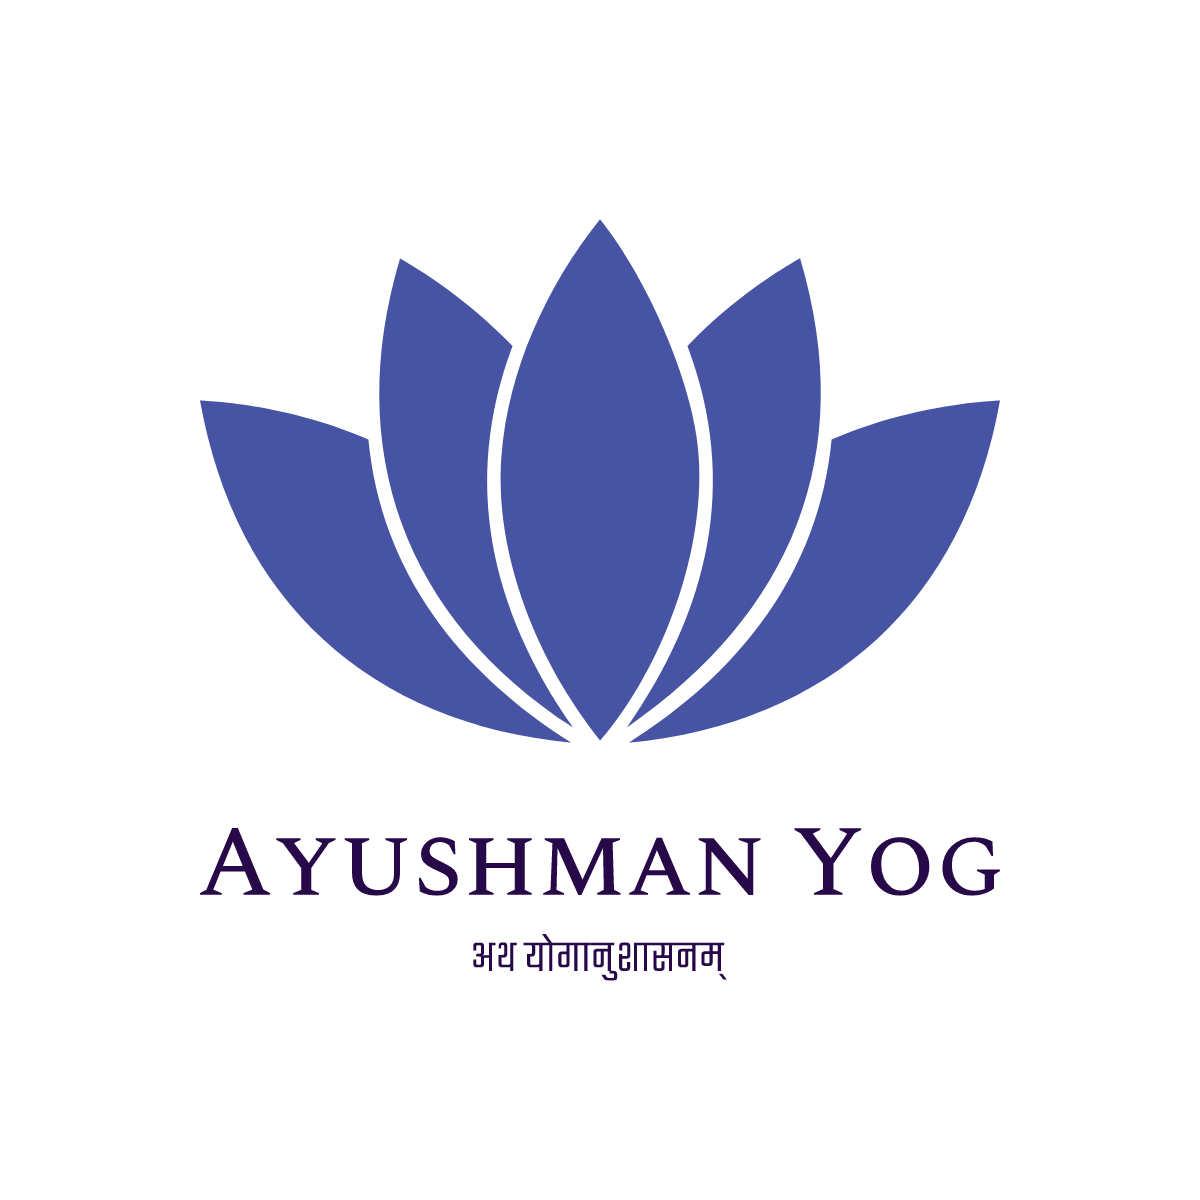 Online Professional Yoga Certification Course by Government of India